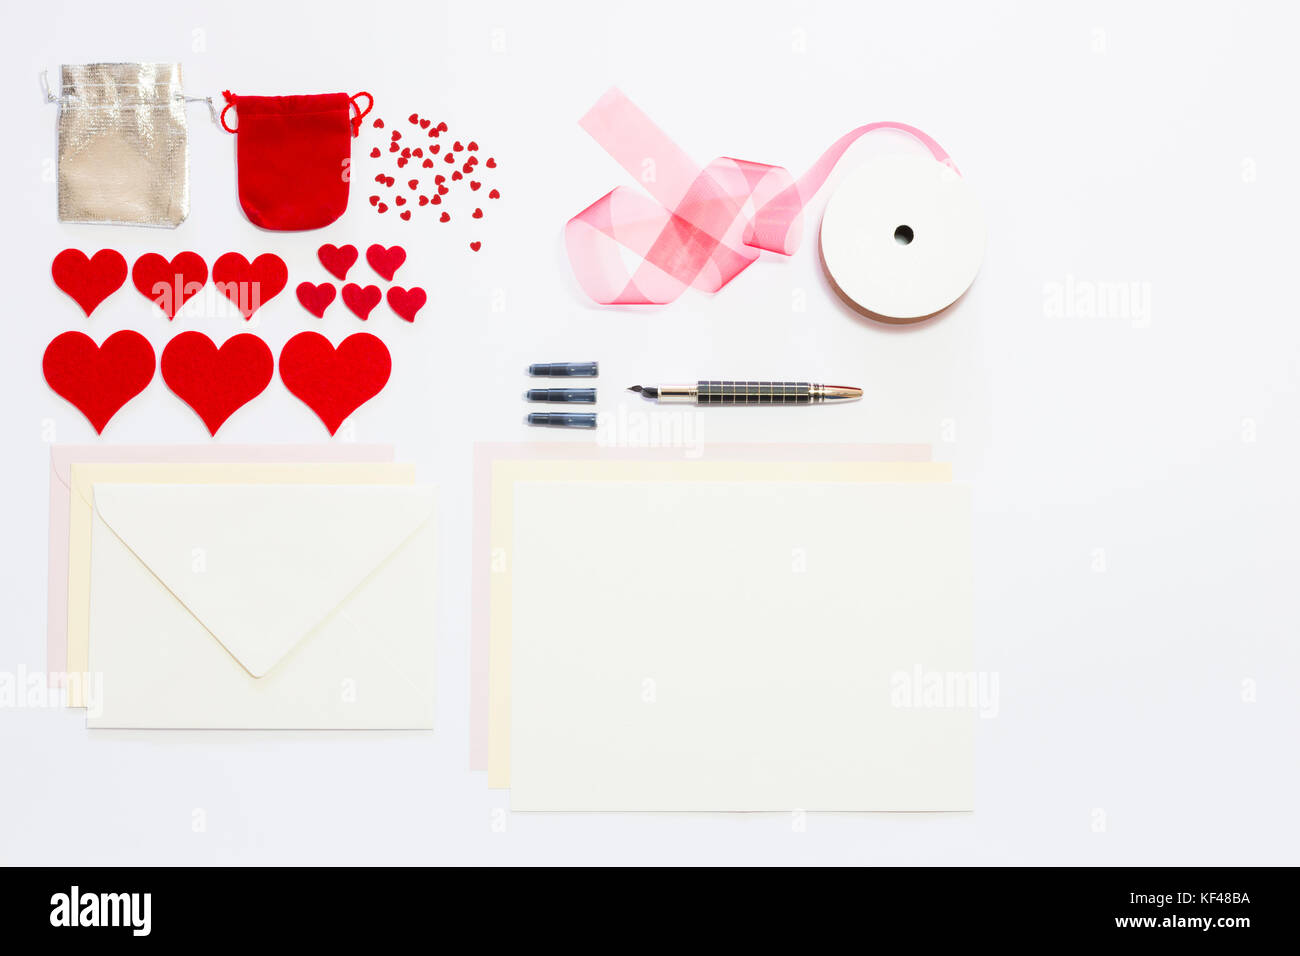 Display of love letter items on white background. Assortment of cards, envelopes, hearts, ribbon and ink pen. Stock Photo